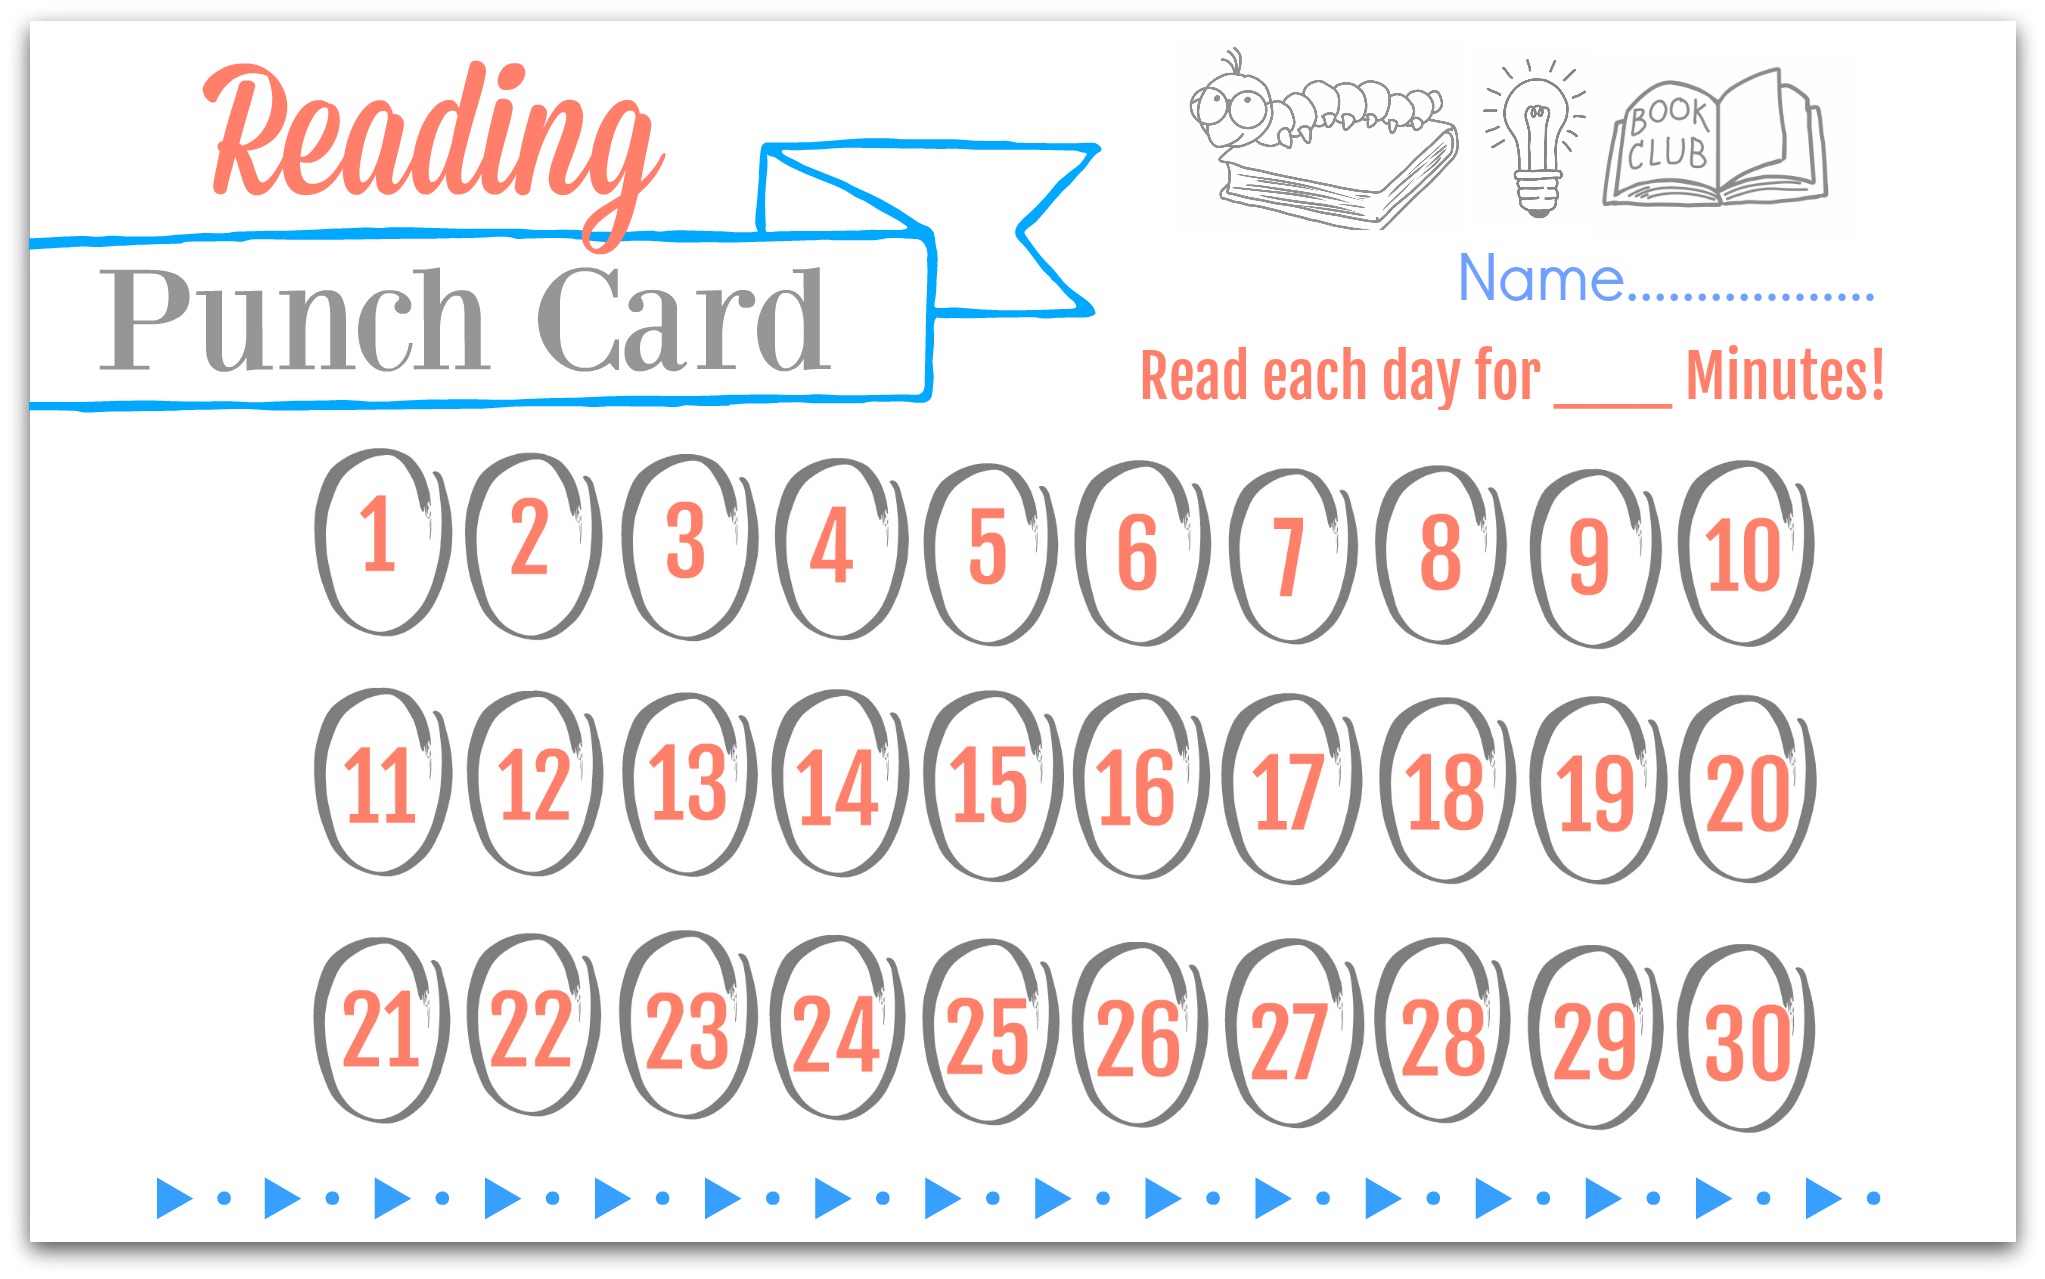 free printable reading punch card – reading punch card